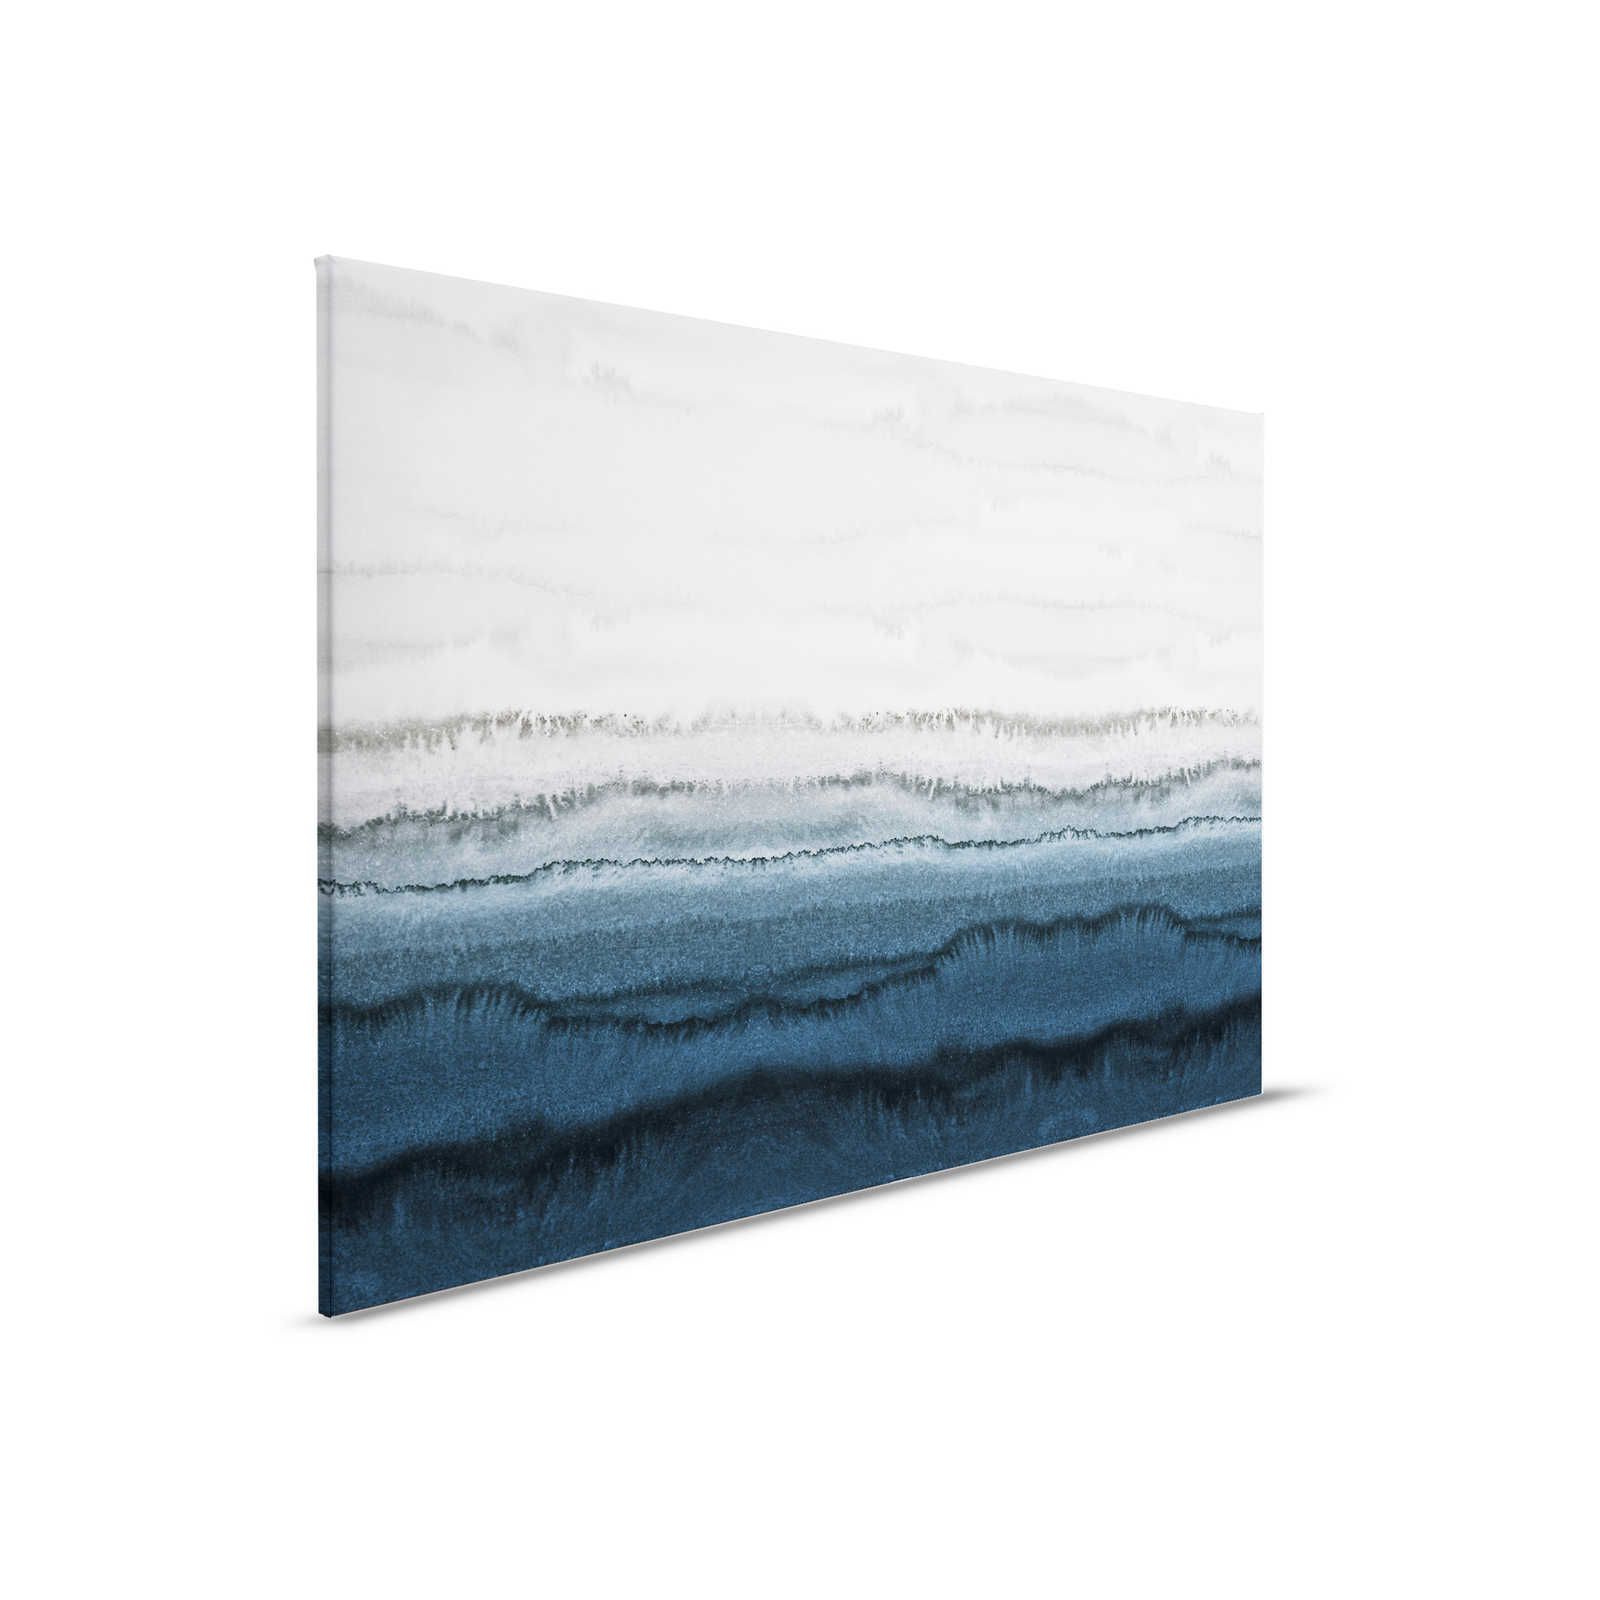         Canvas painting Tides in minimalist watercolour style - 0,90 m x 0,60 m
    